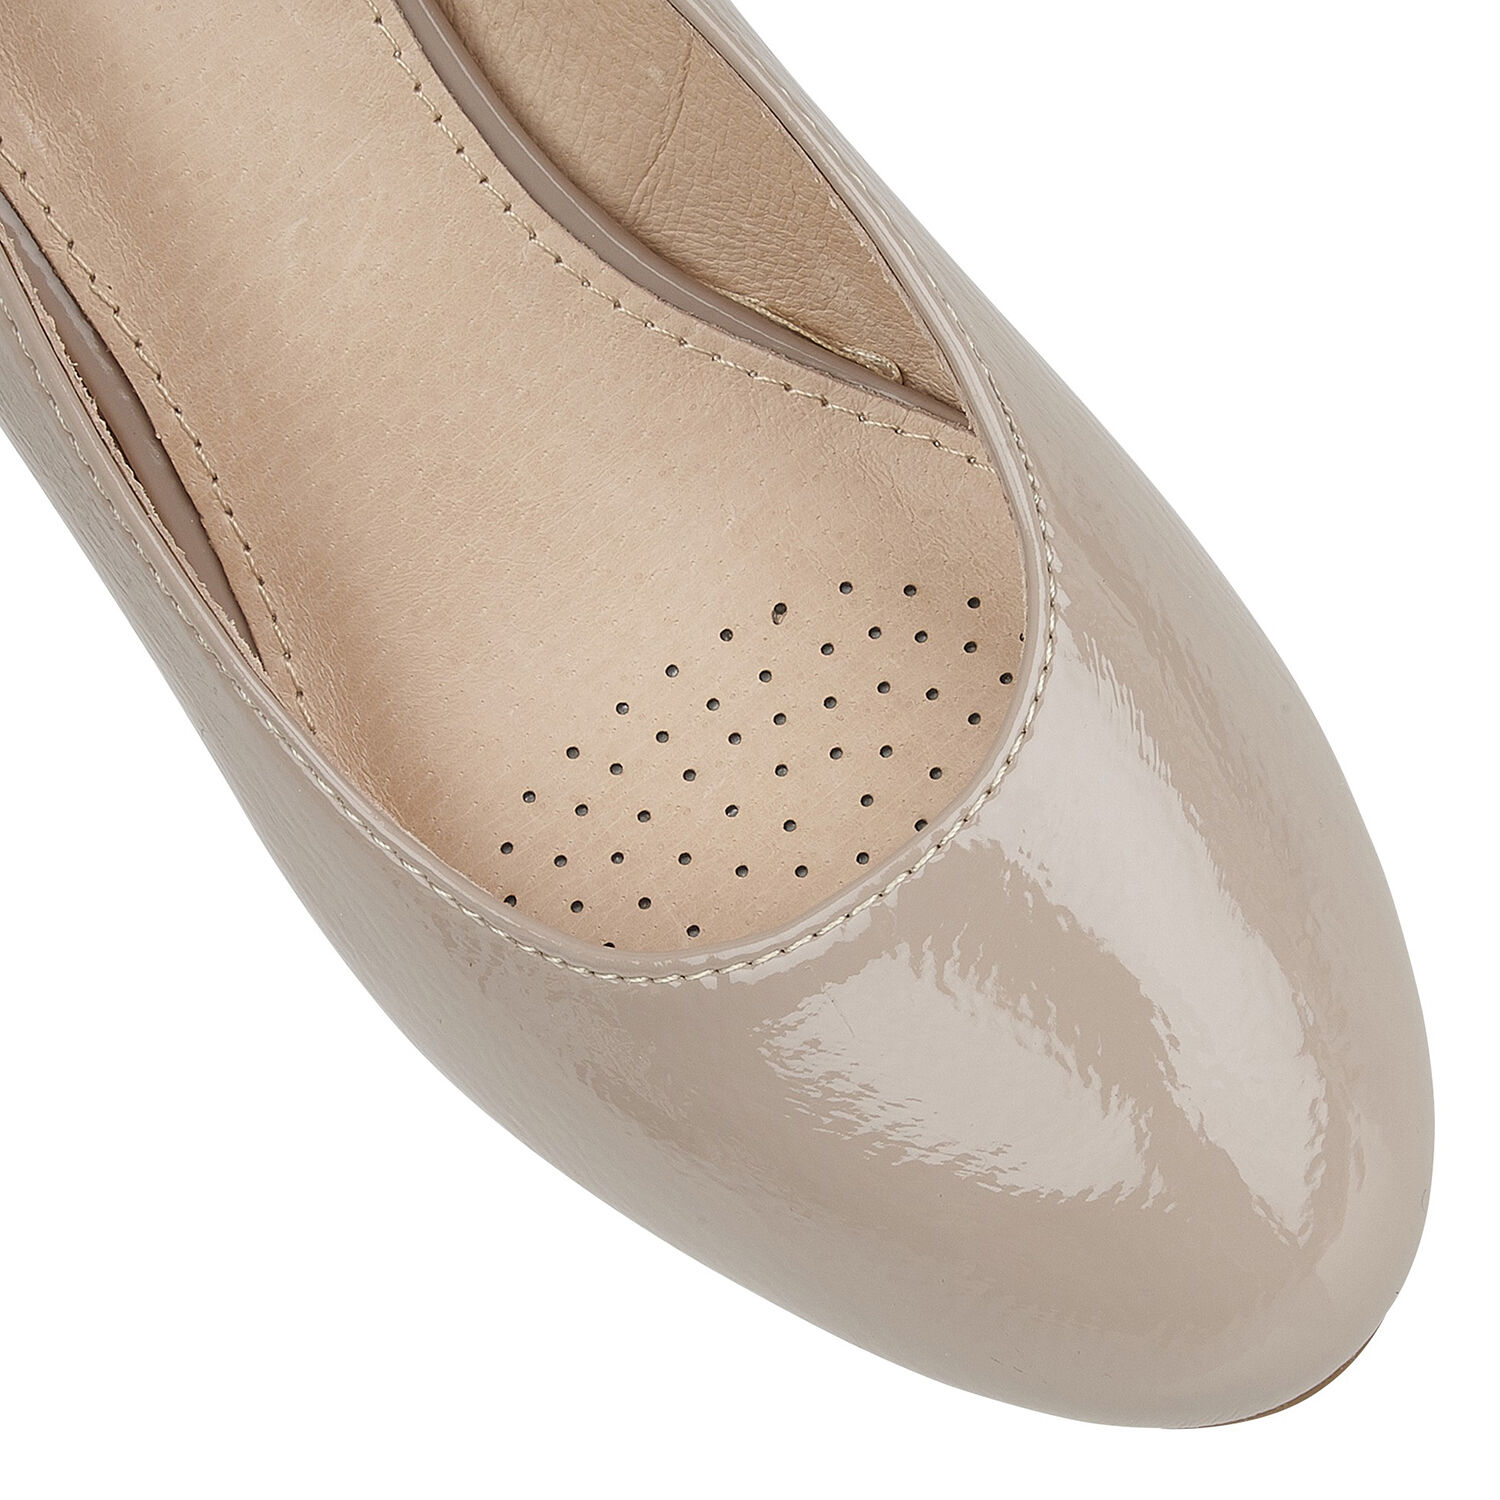 lotus nude shoes